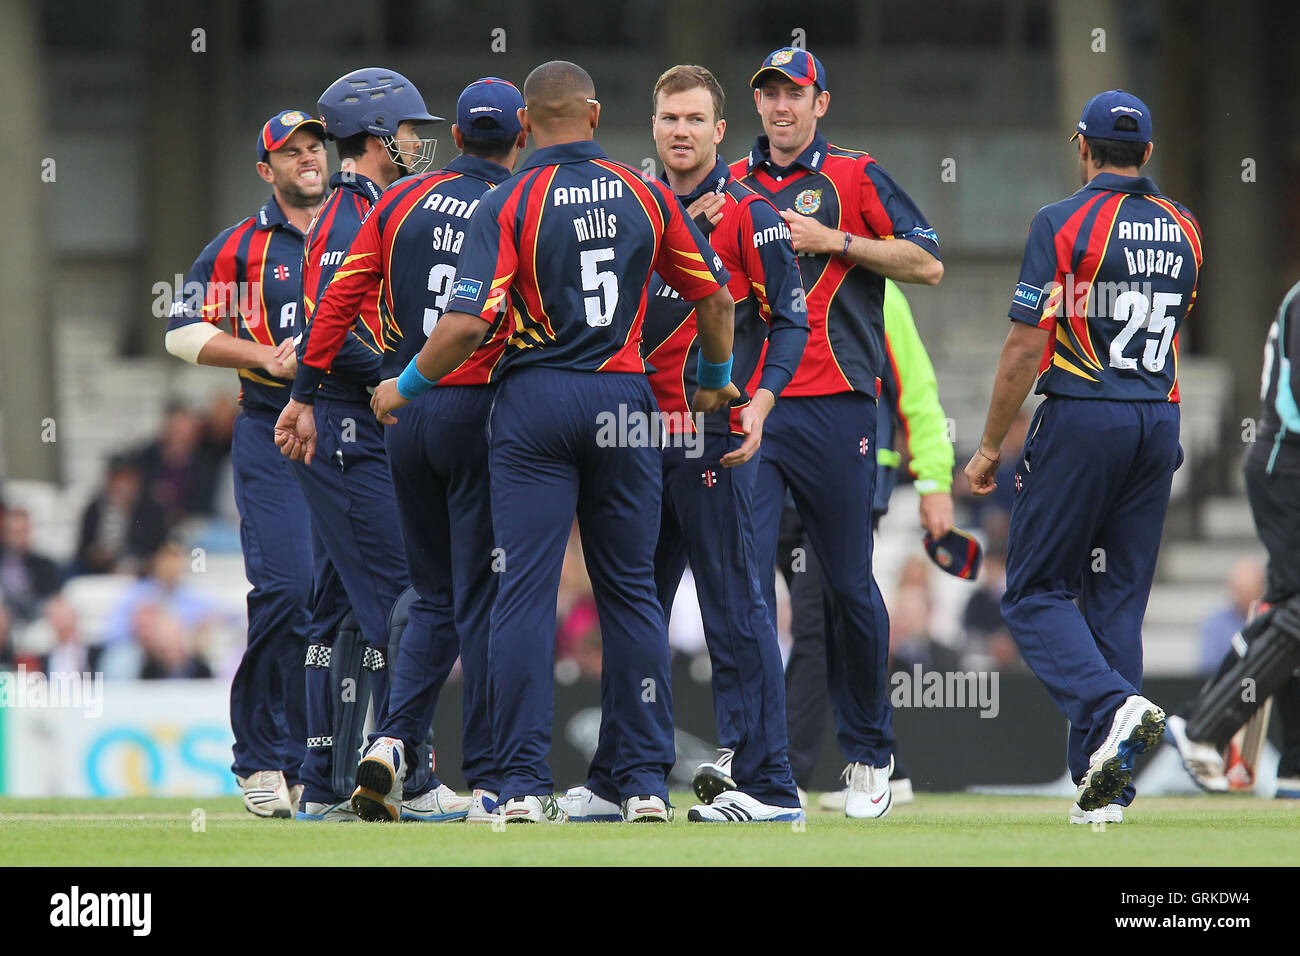 Essex players celebrate the wicket of Steven Davies - Surrey Lions vs Essex Eagles - Friends Life T20 South Division Cricket at the Kia Oval,London - 13/06/12. Stock Photo